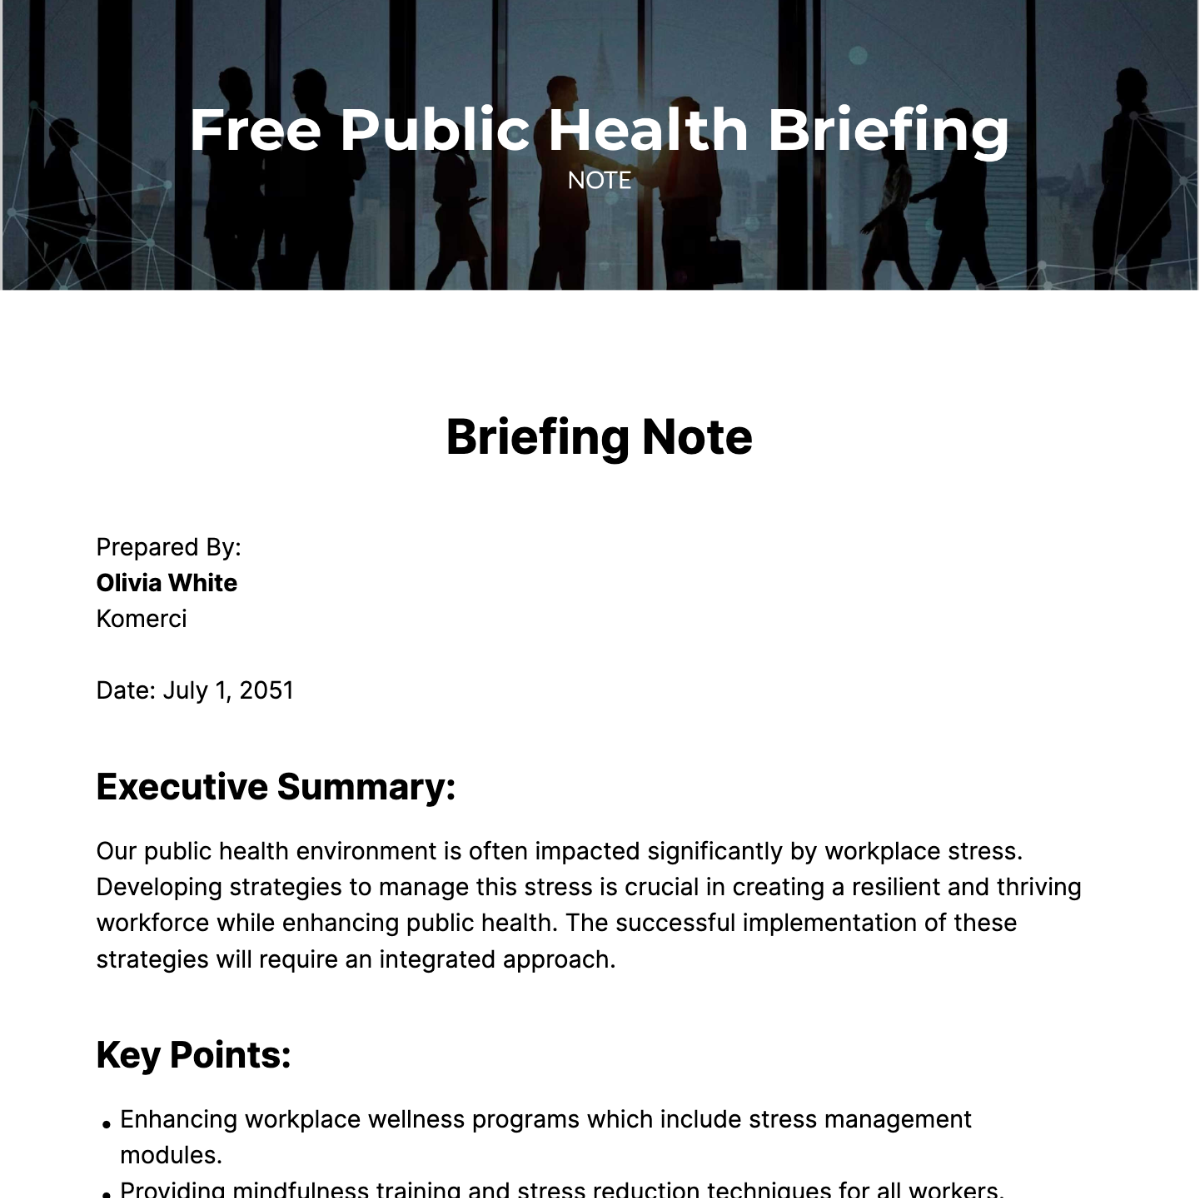 Free Public Health Briefing Note Template